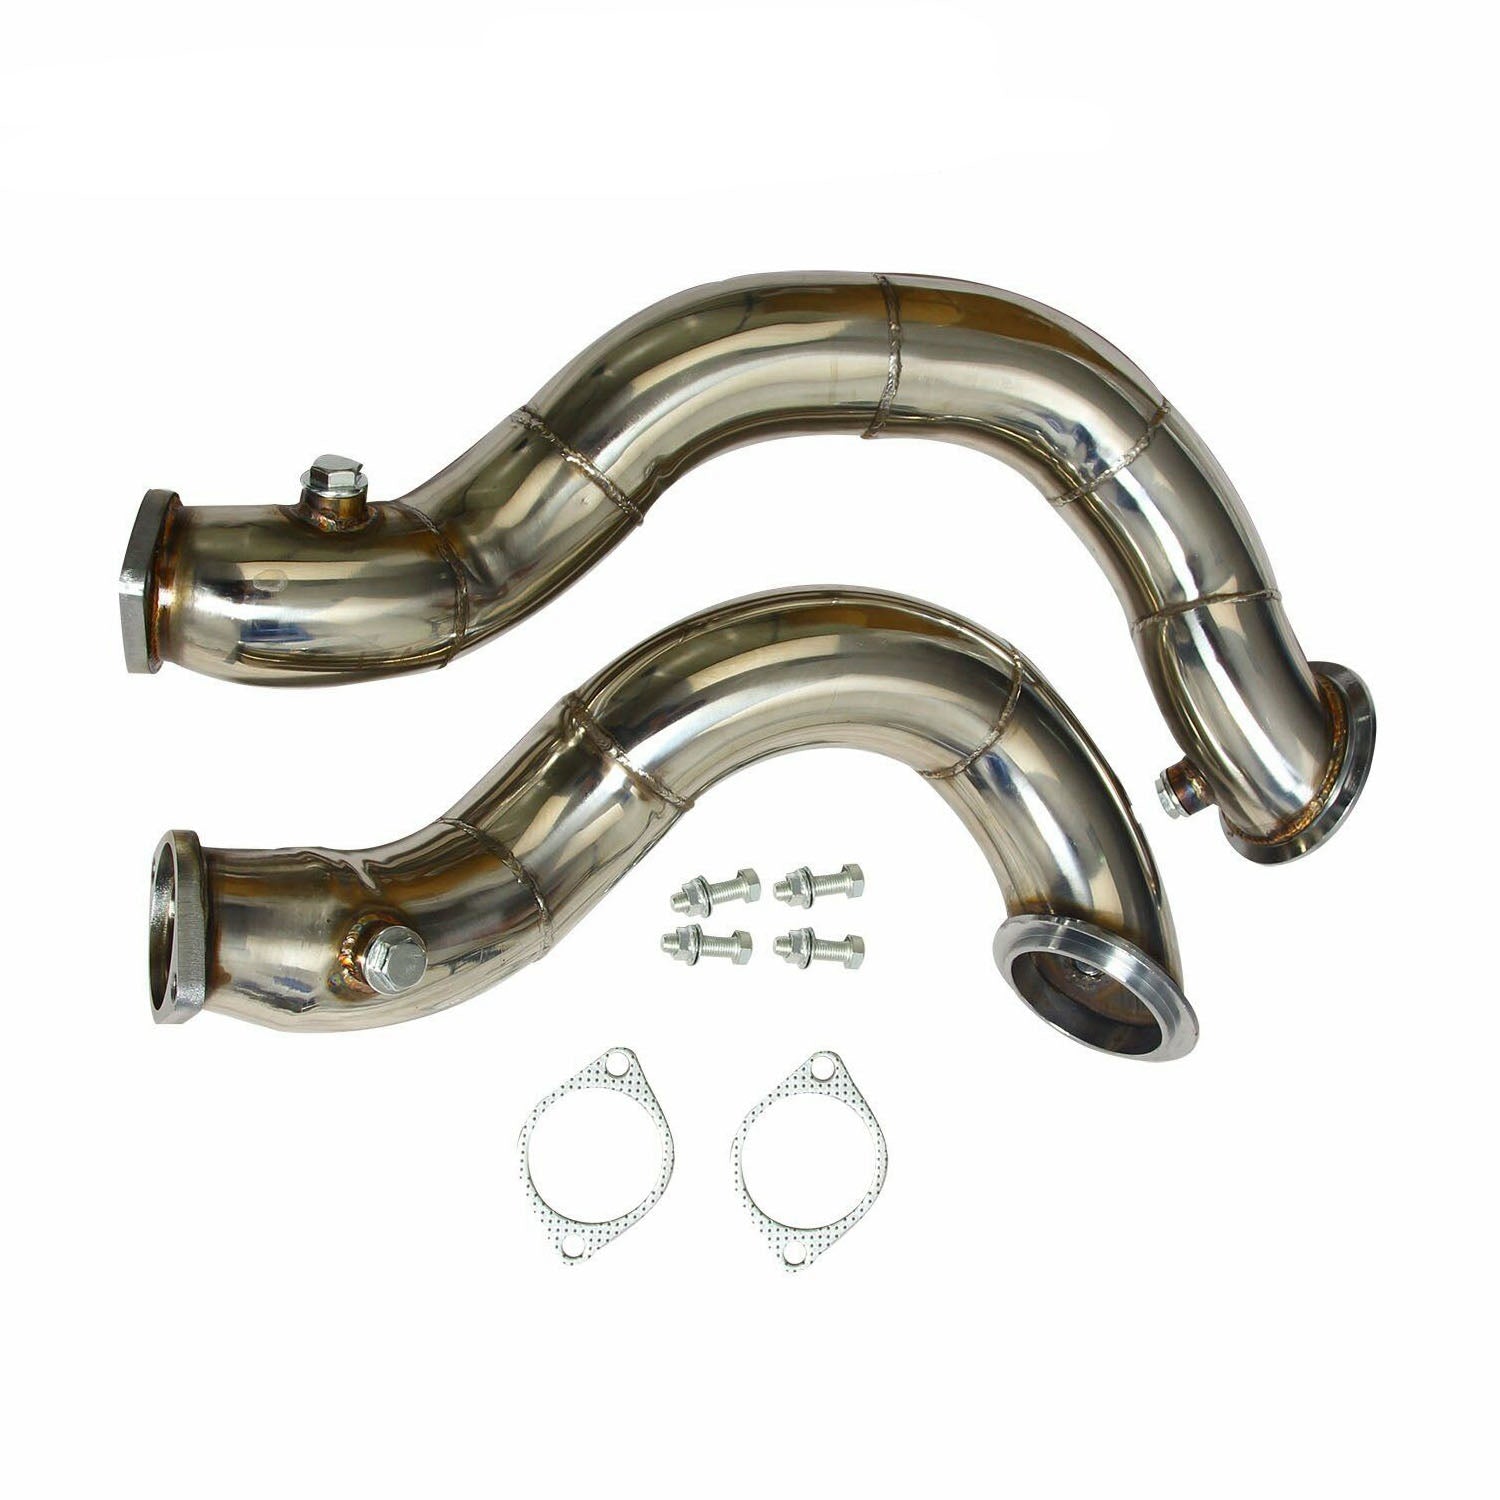 Exhaust Downpipe For N54 V2 2007-2010 BMW 335i / 2008-2012 BMW 135i